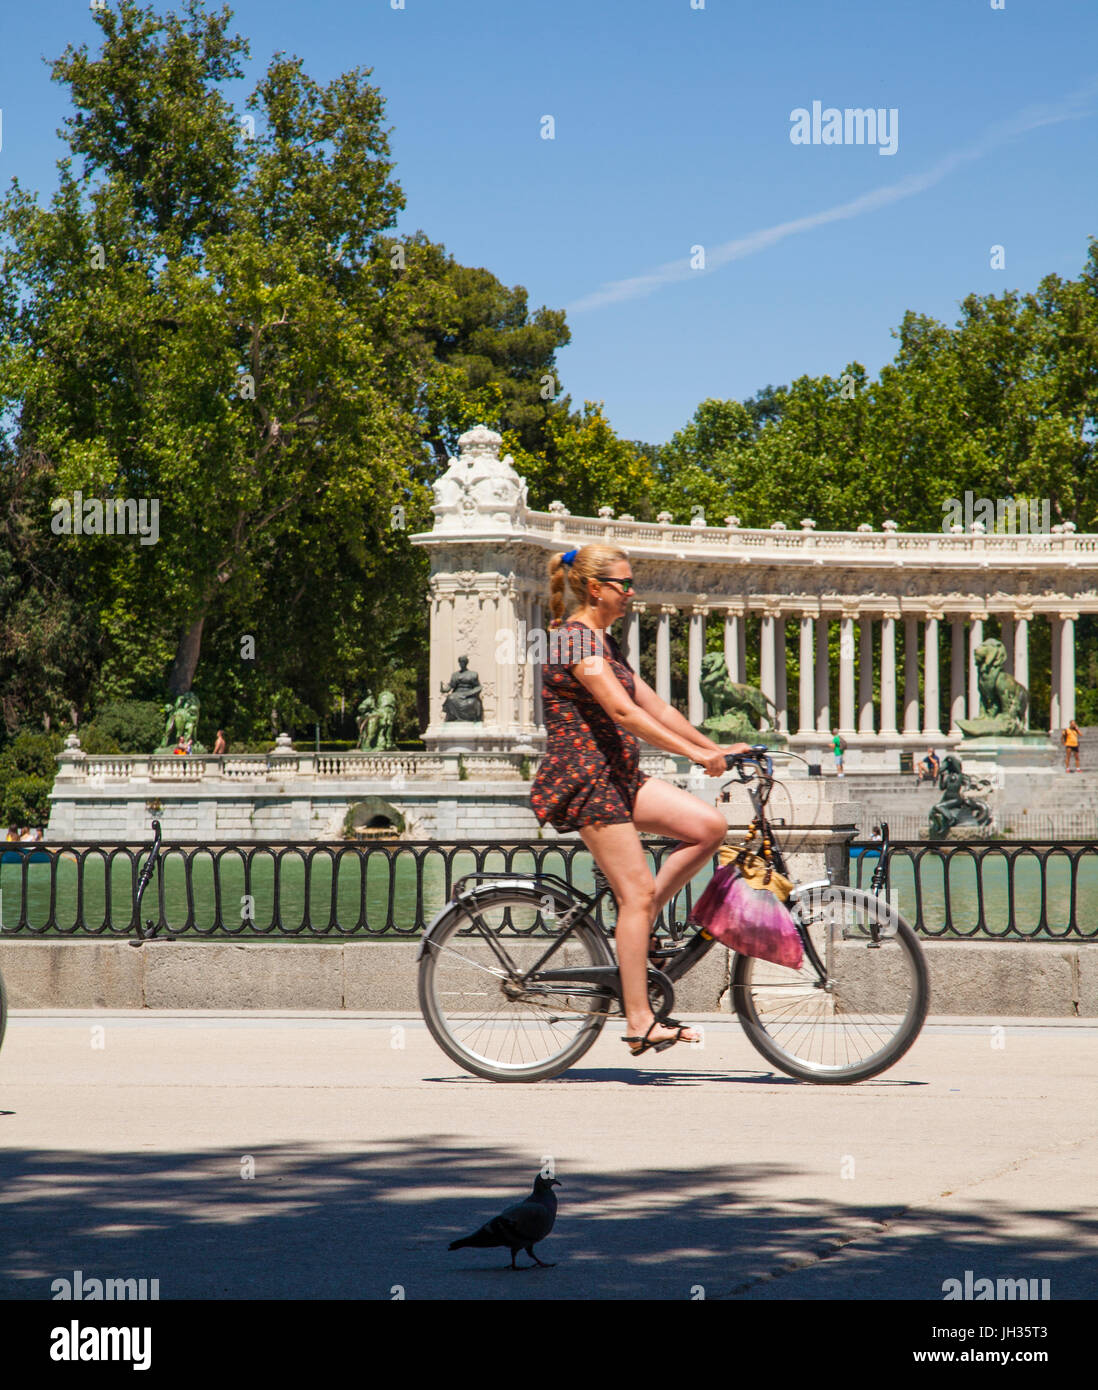 Woman riding a bike in Madrid's Park del Retiro/ Parque del Retiro past the boating lake with the monument to King Alfonso XII n the back ground Stock Photo